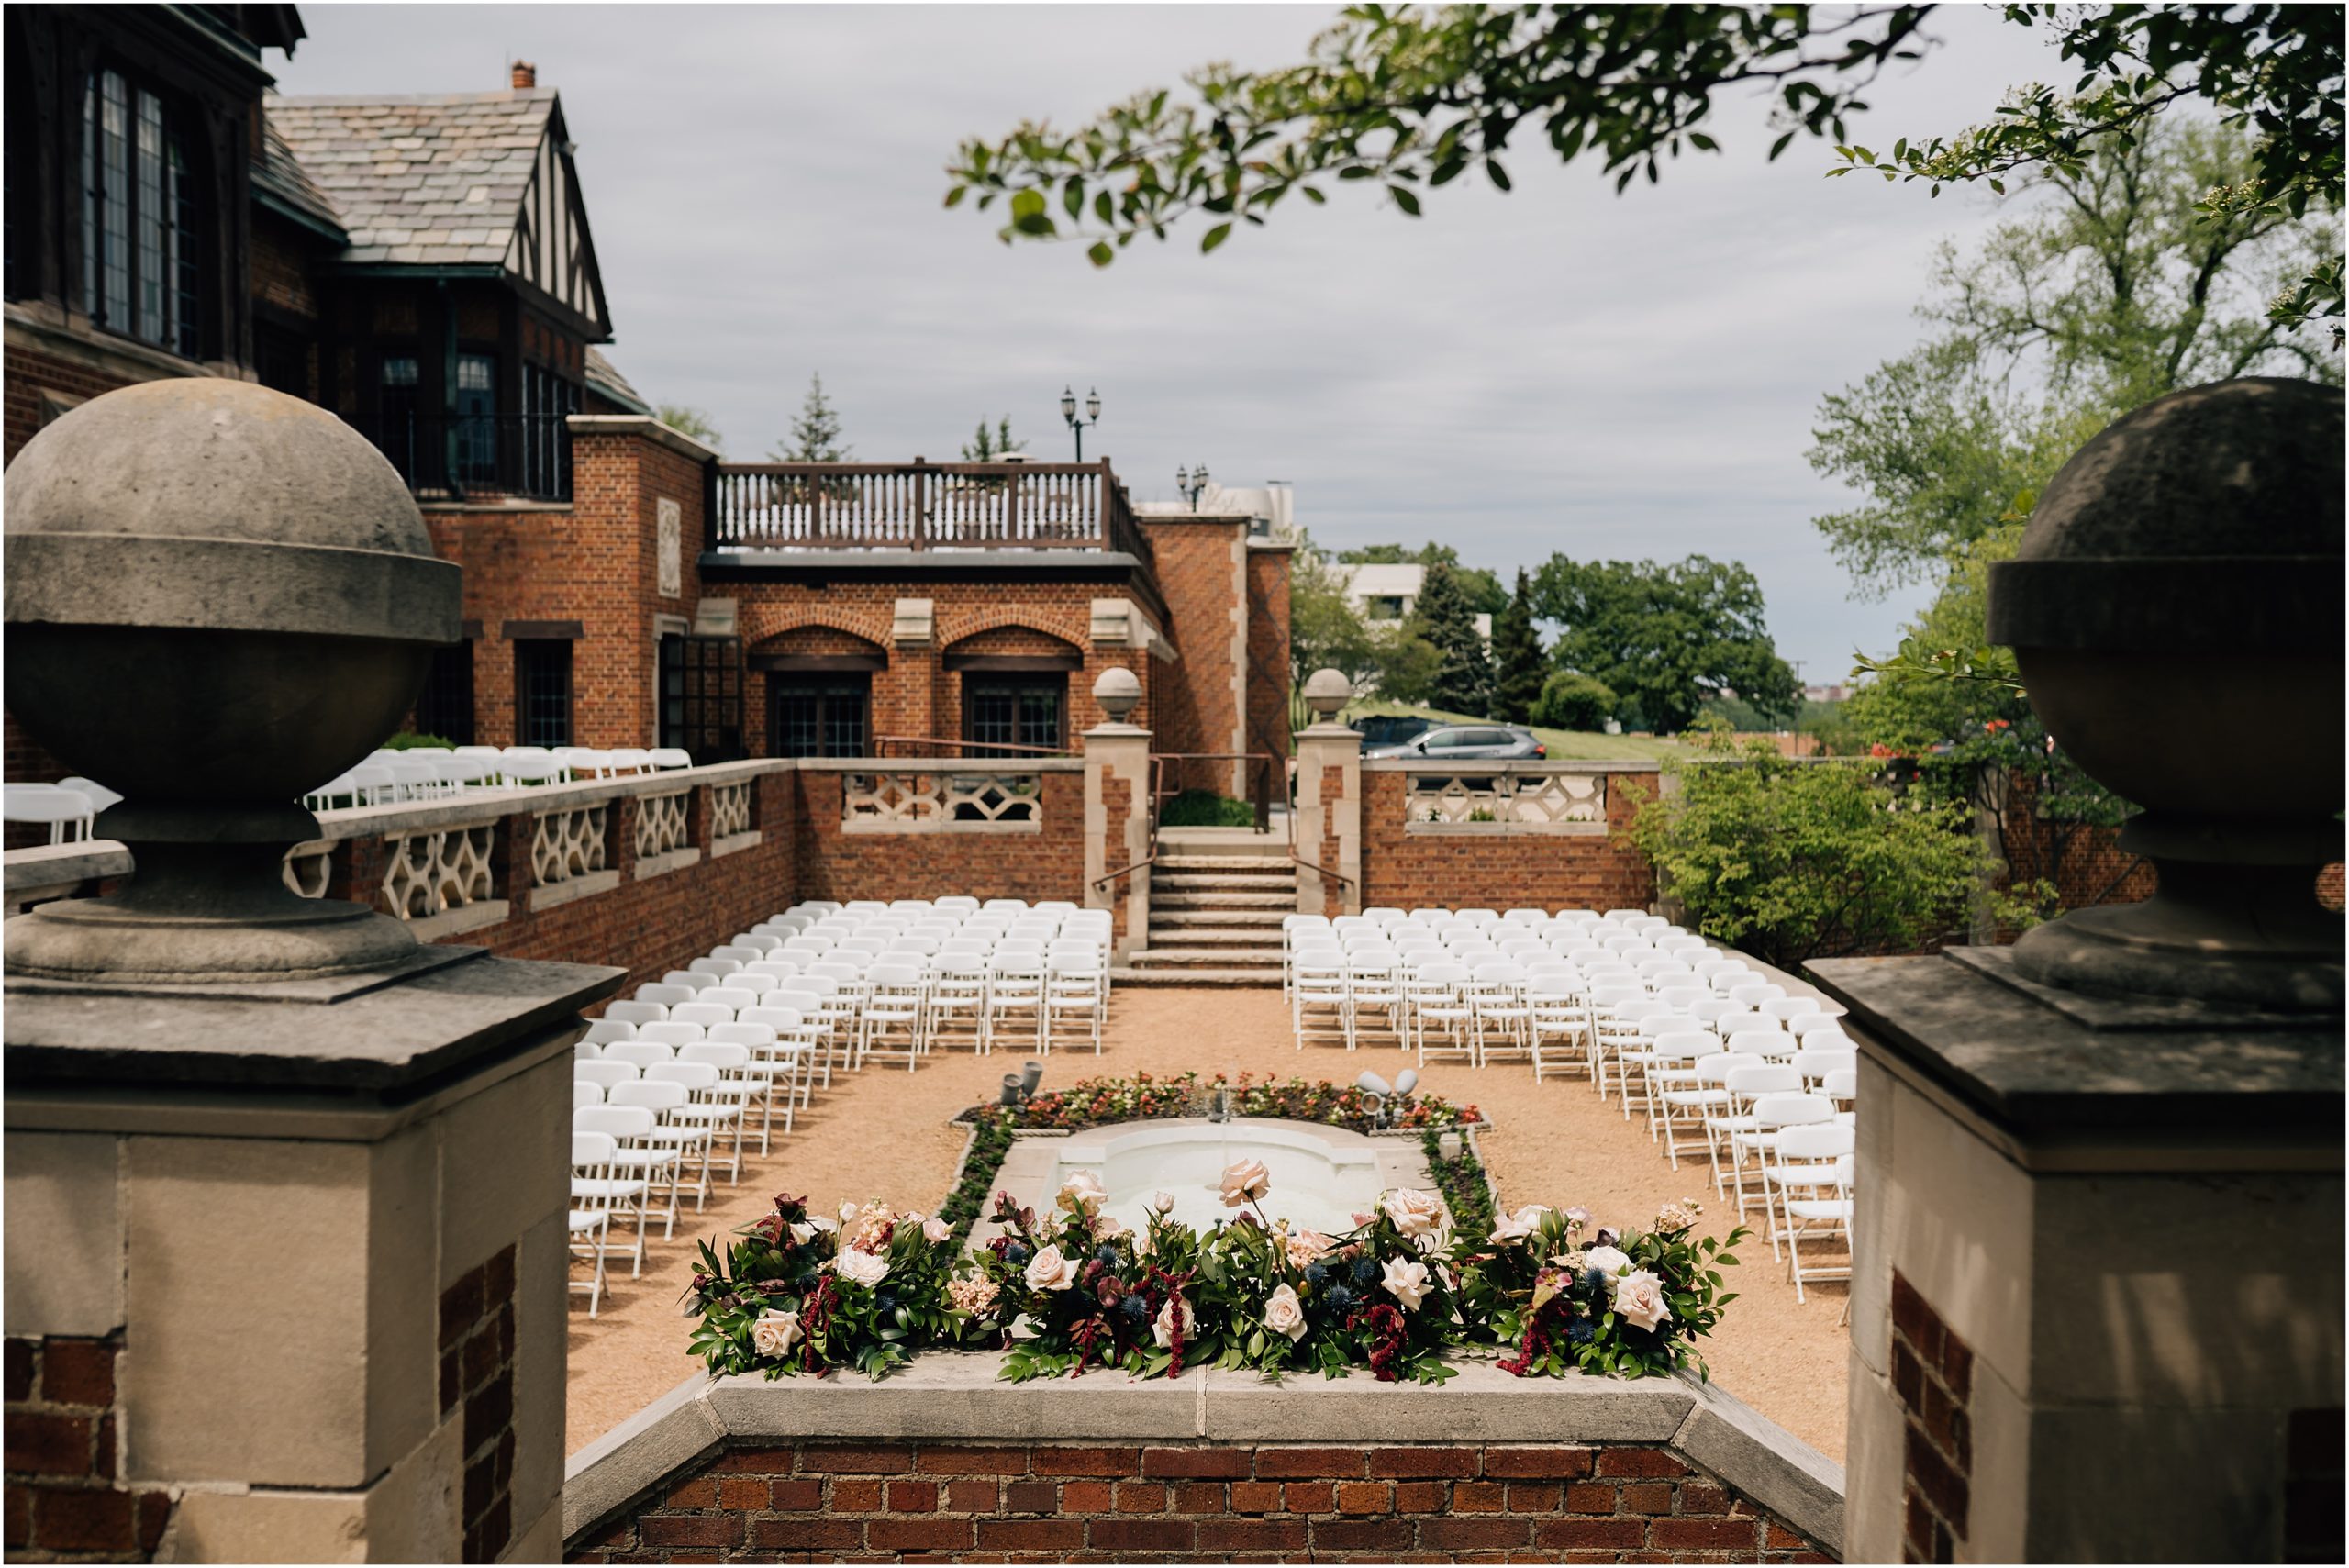 The courtyard at Rollins Mansion from above. There's white chairs all around and florals sitting on the brick borders. Photo at Rollins Mansion by Anna Brace, who specializes in Omaha Nebraska Wedding Photography